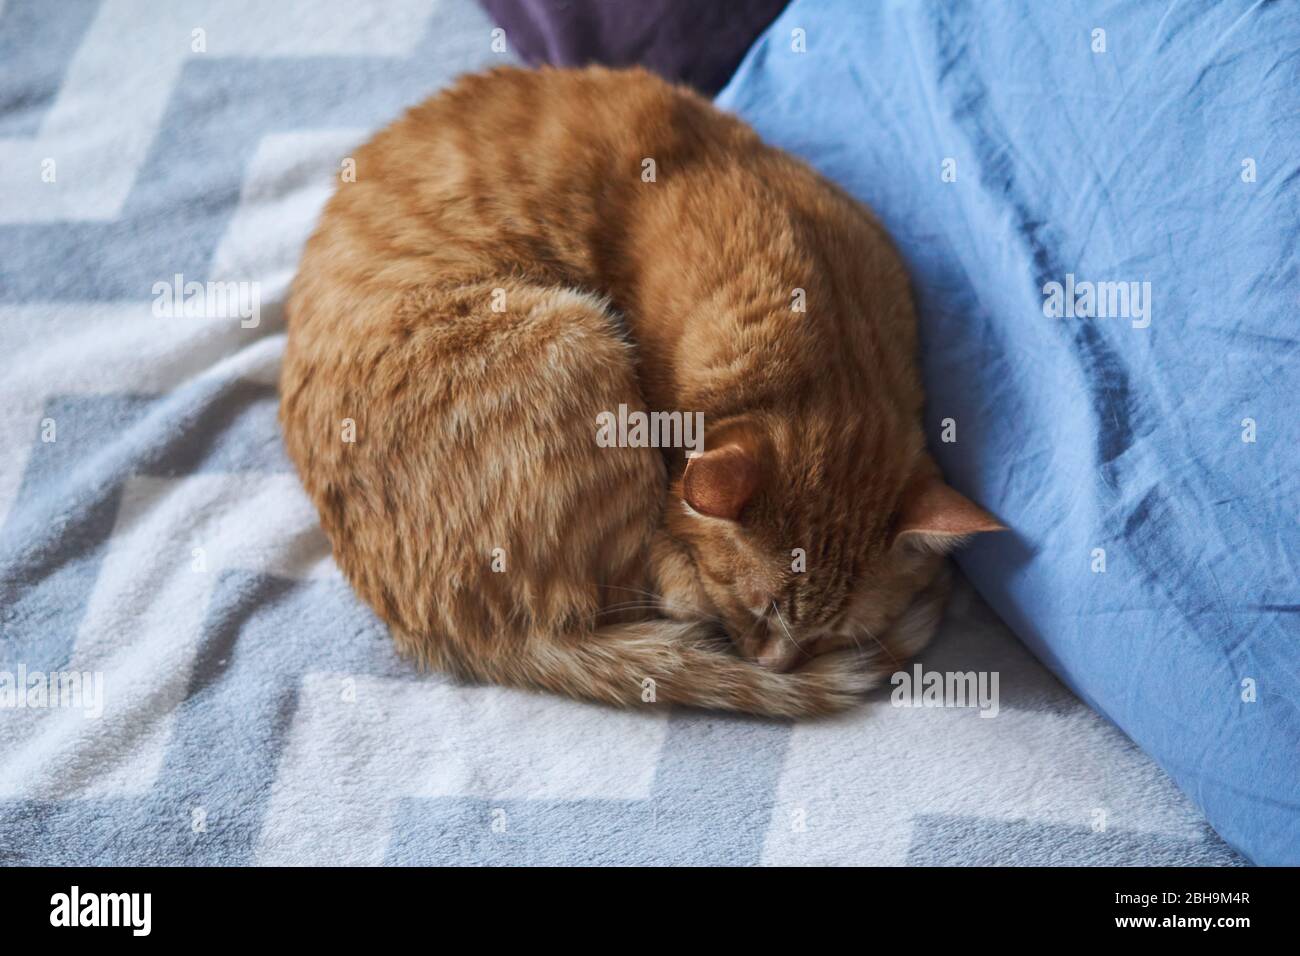 Ginger cat lies on a bed with pillows. Fluffy pet is doing to sleep there. A ginger tabby cat lying curled up, sleeping. Concept of relaxation, calmne Stock Photo